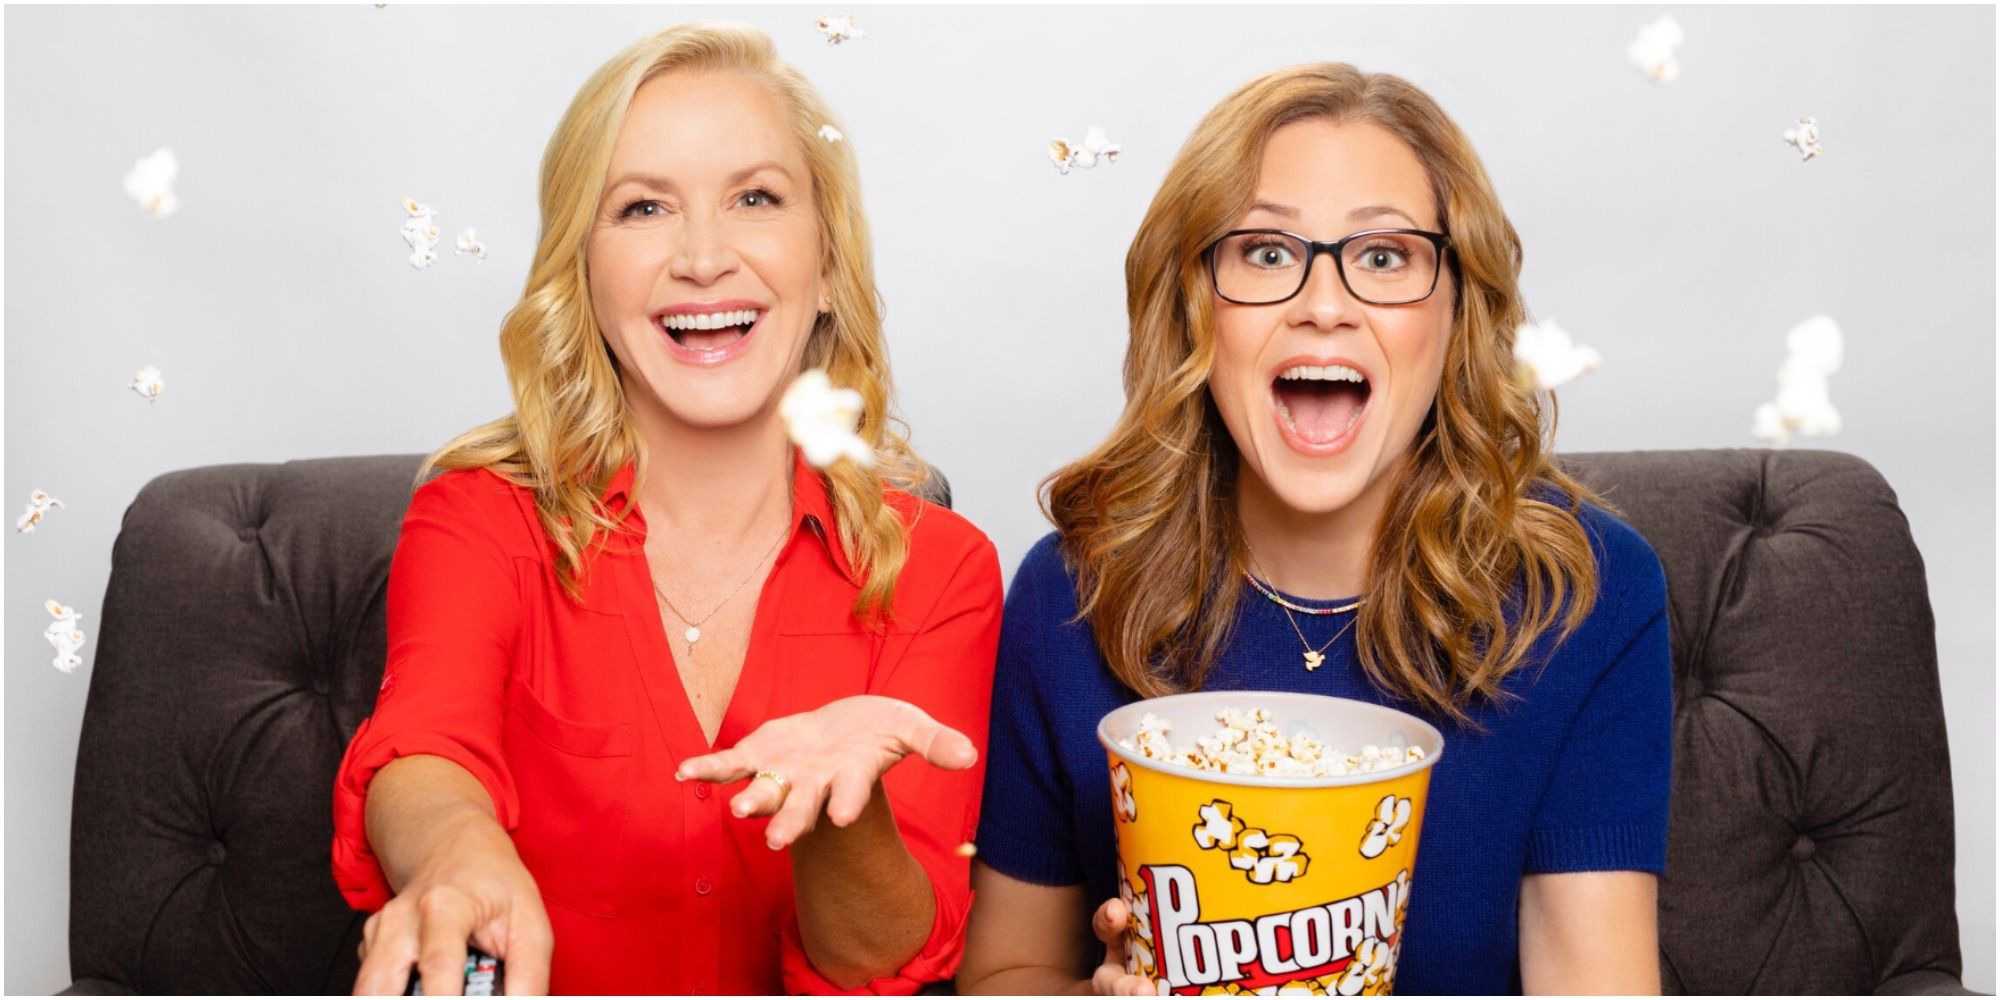 A promotional image of Pam Beesly and Angela Kinsey for the podcast Office Ladies